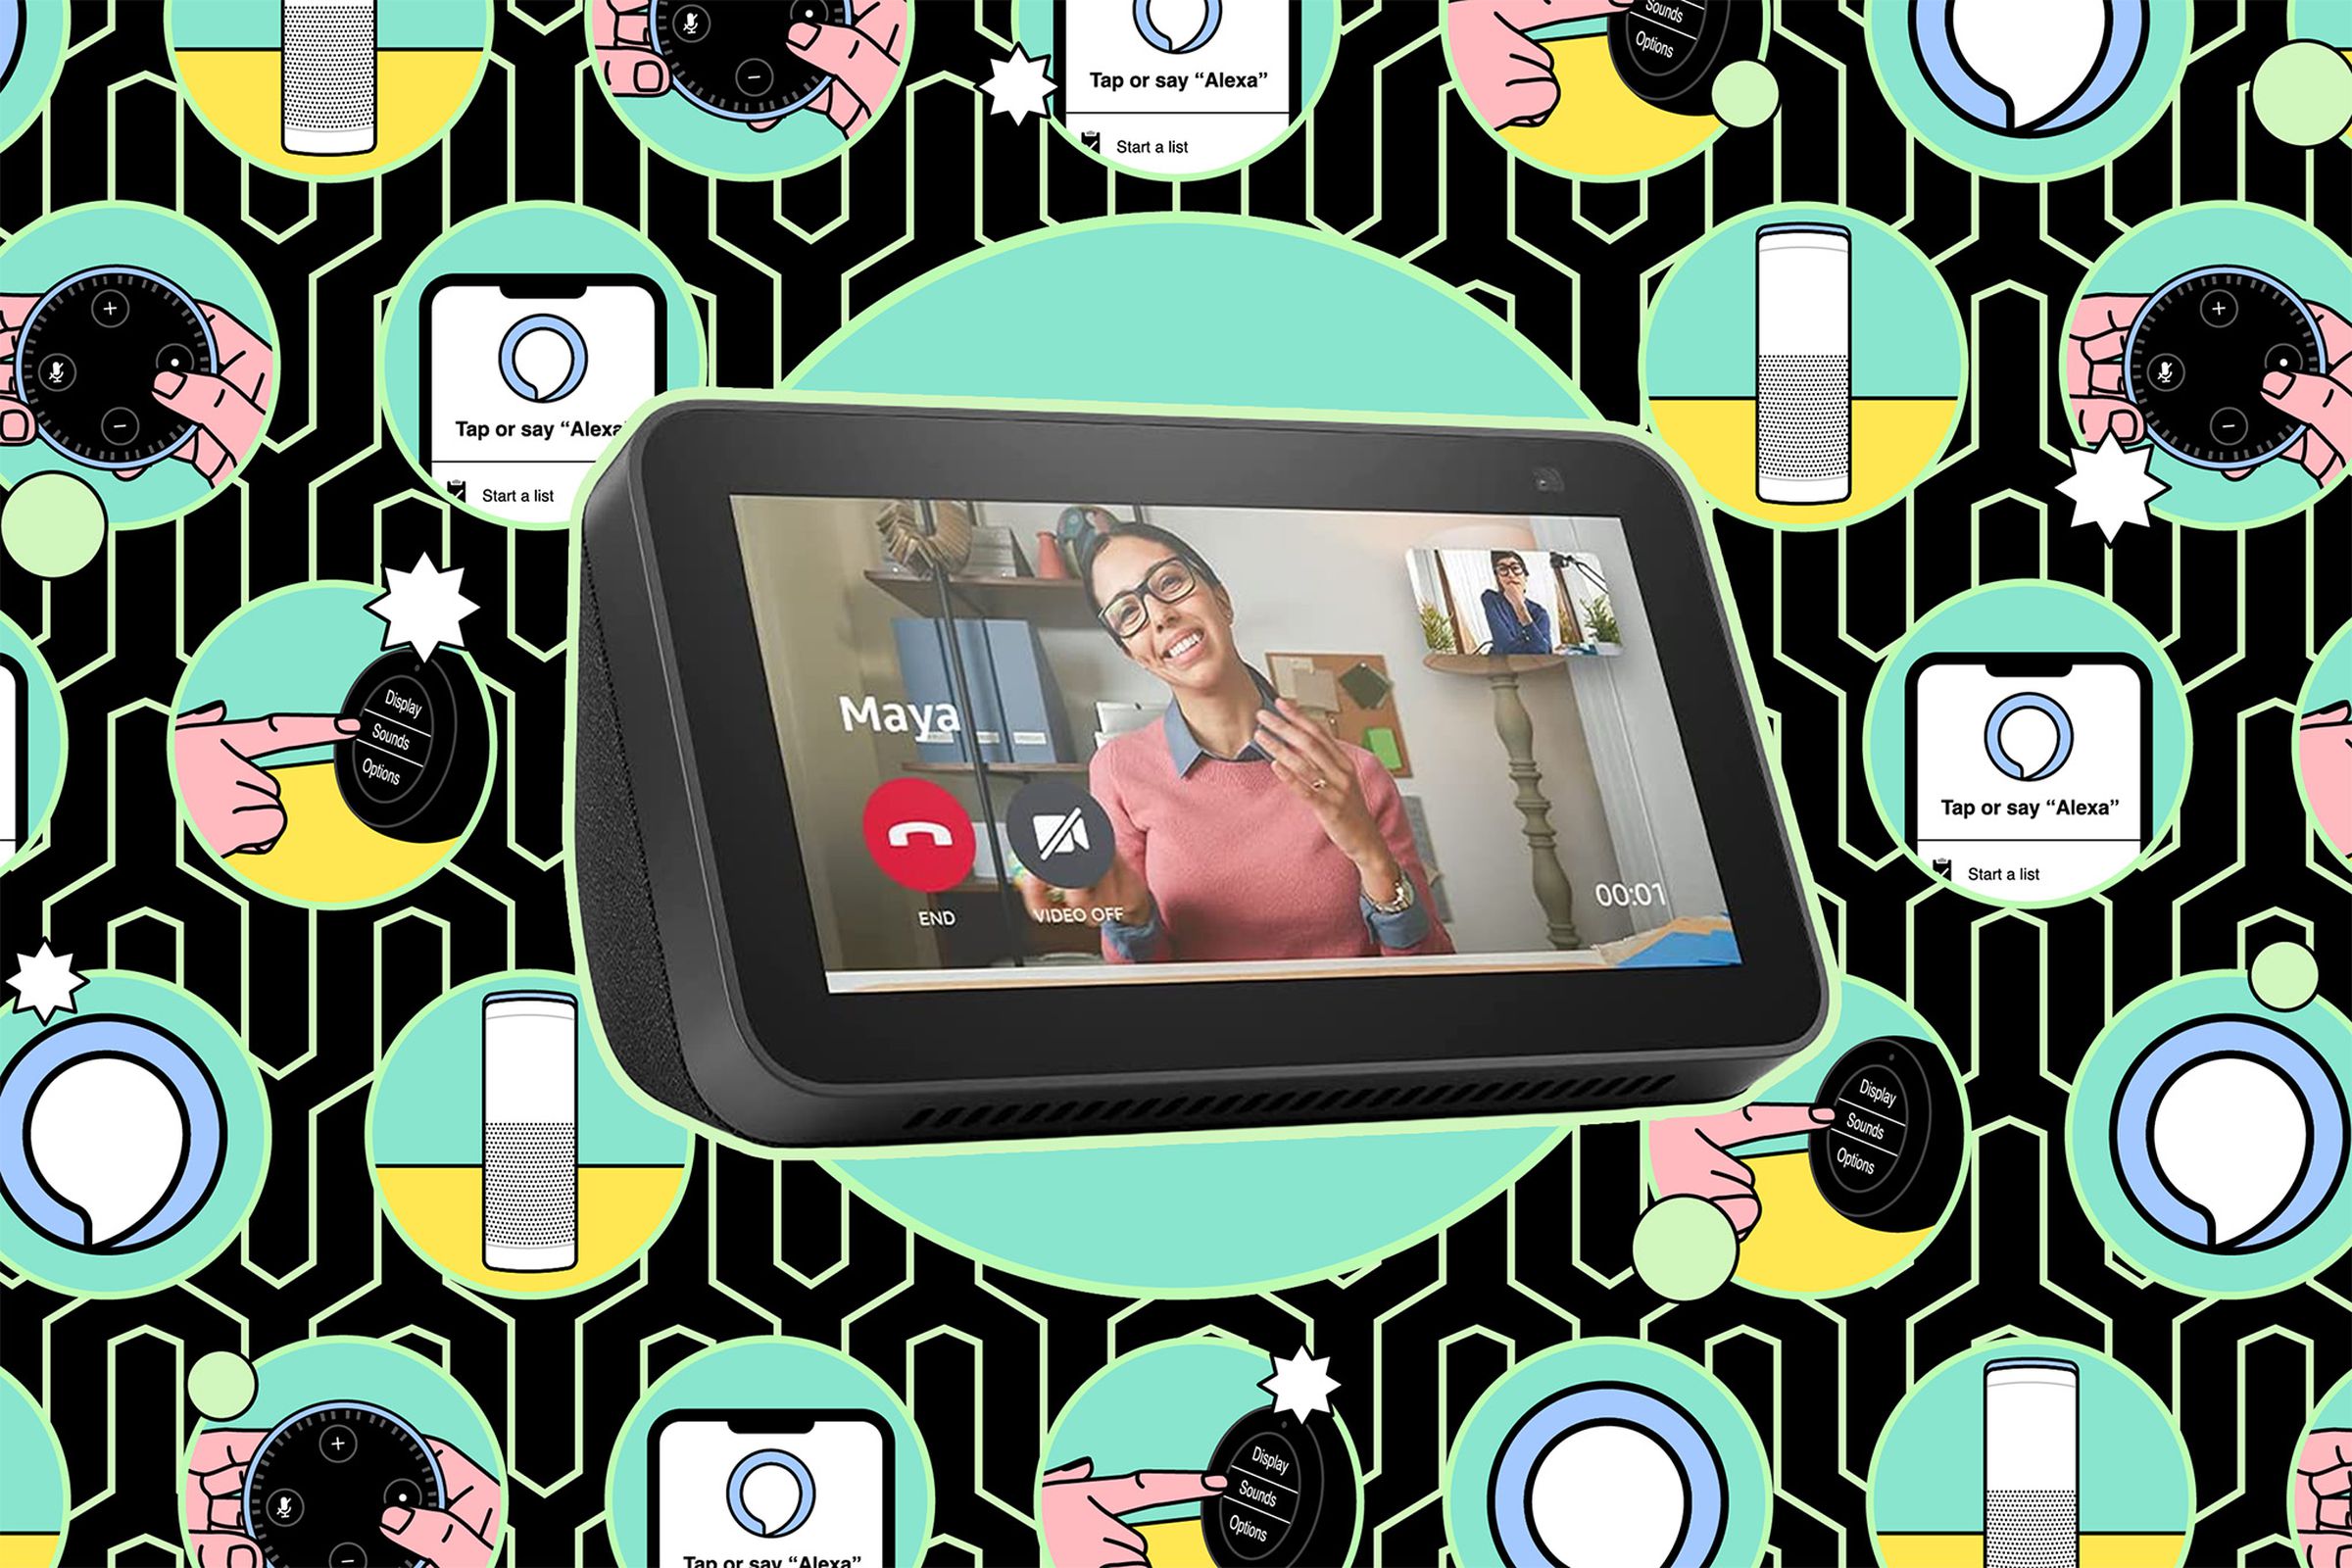 Echo show showing person on screen against an illustrated background.